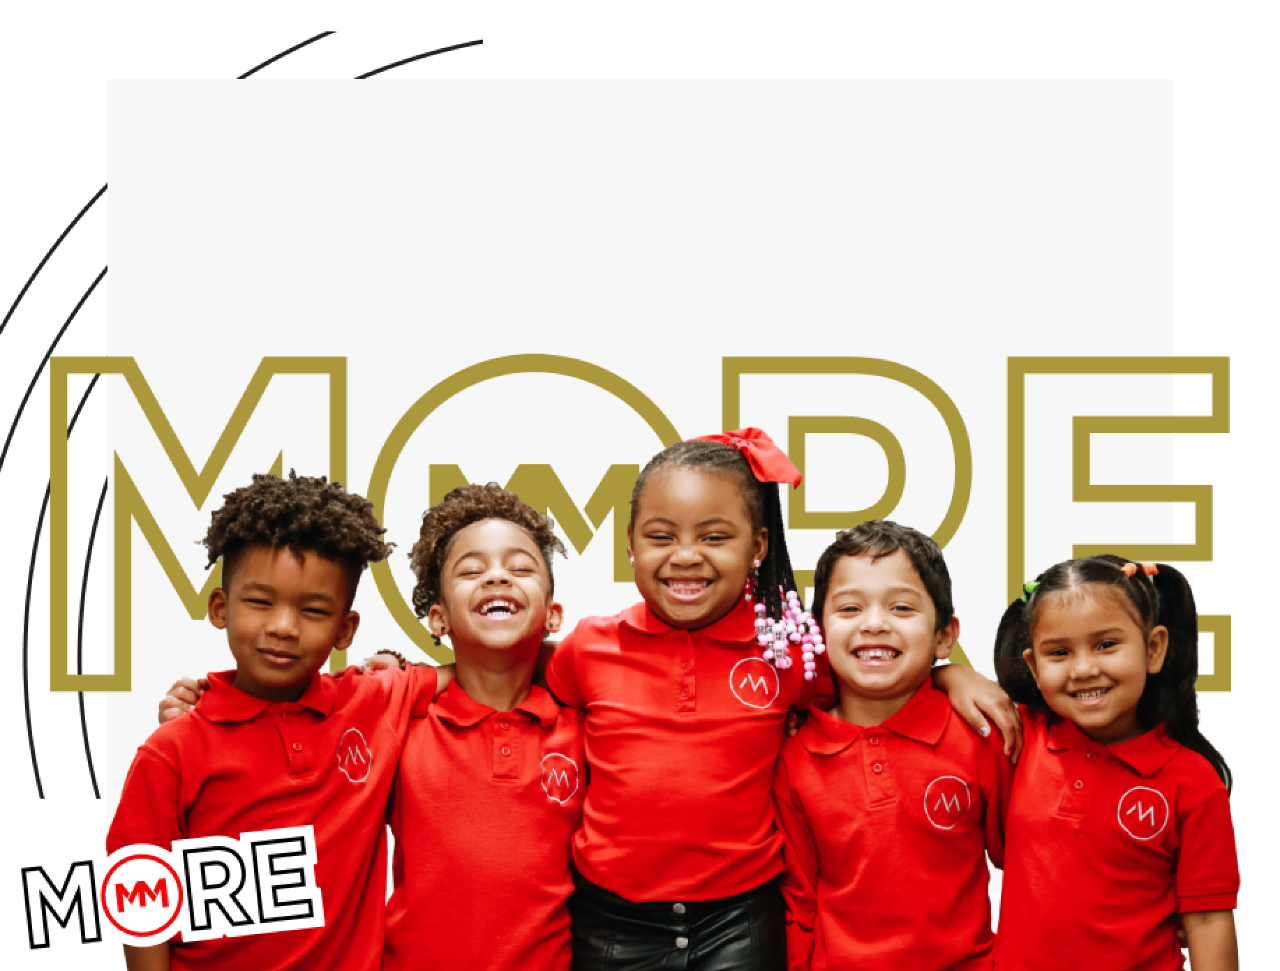 5 children together wearing red Movement Mortgage shirts